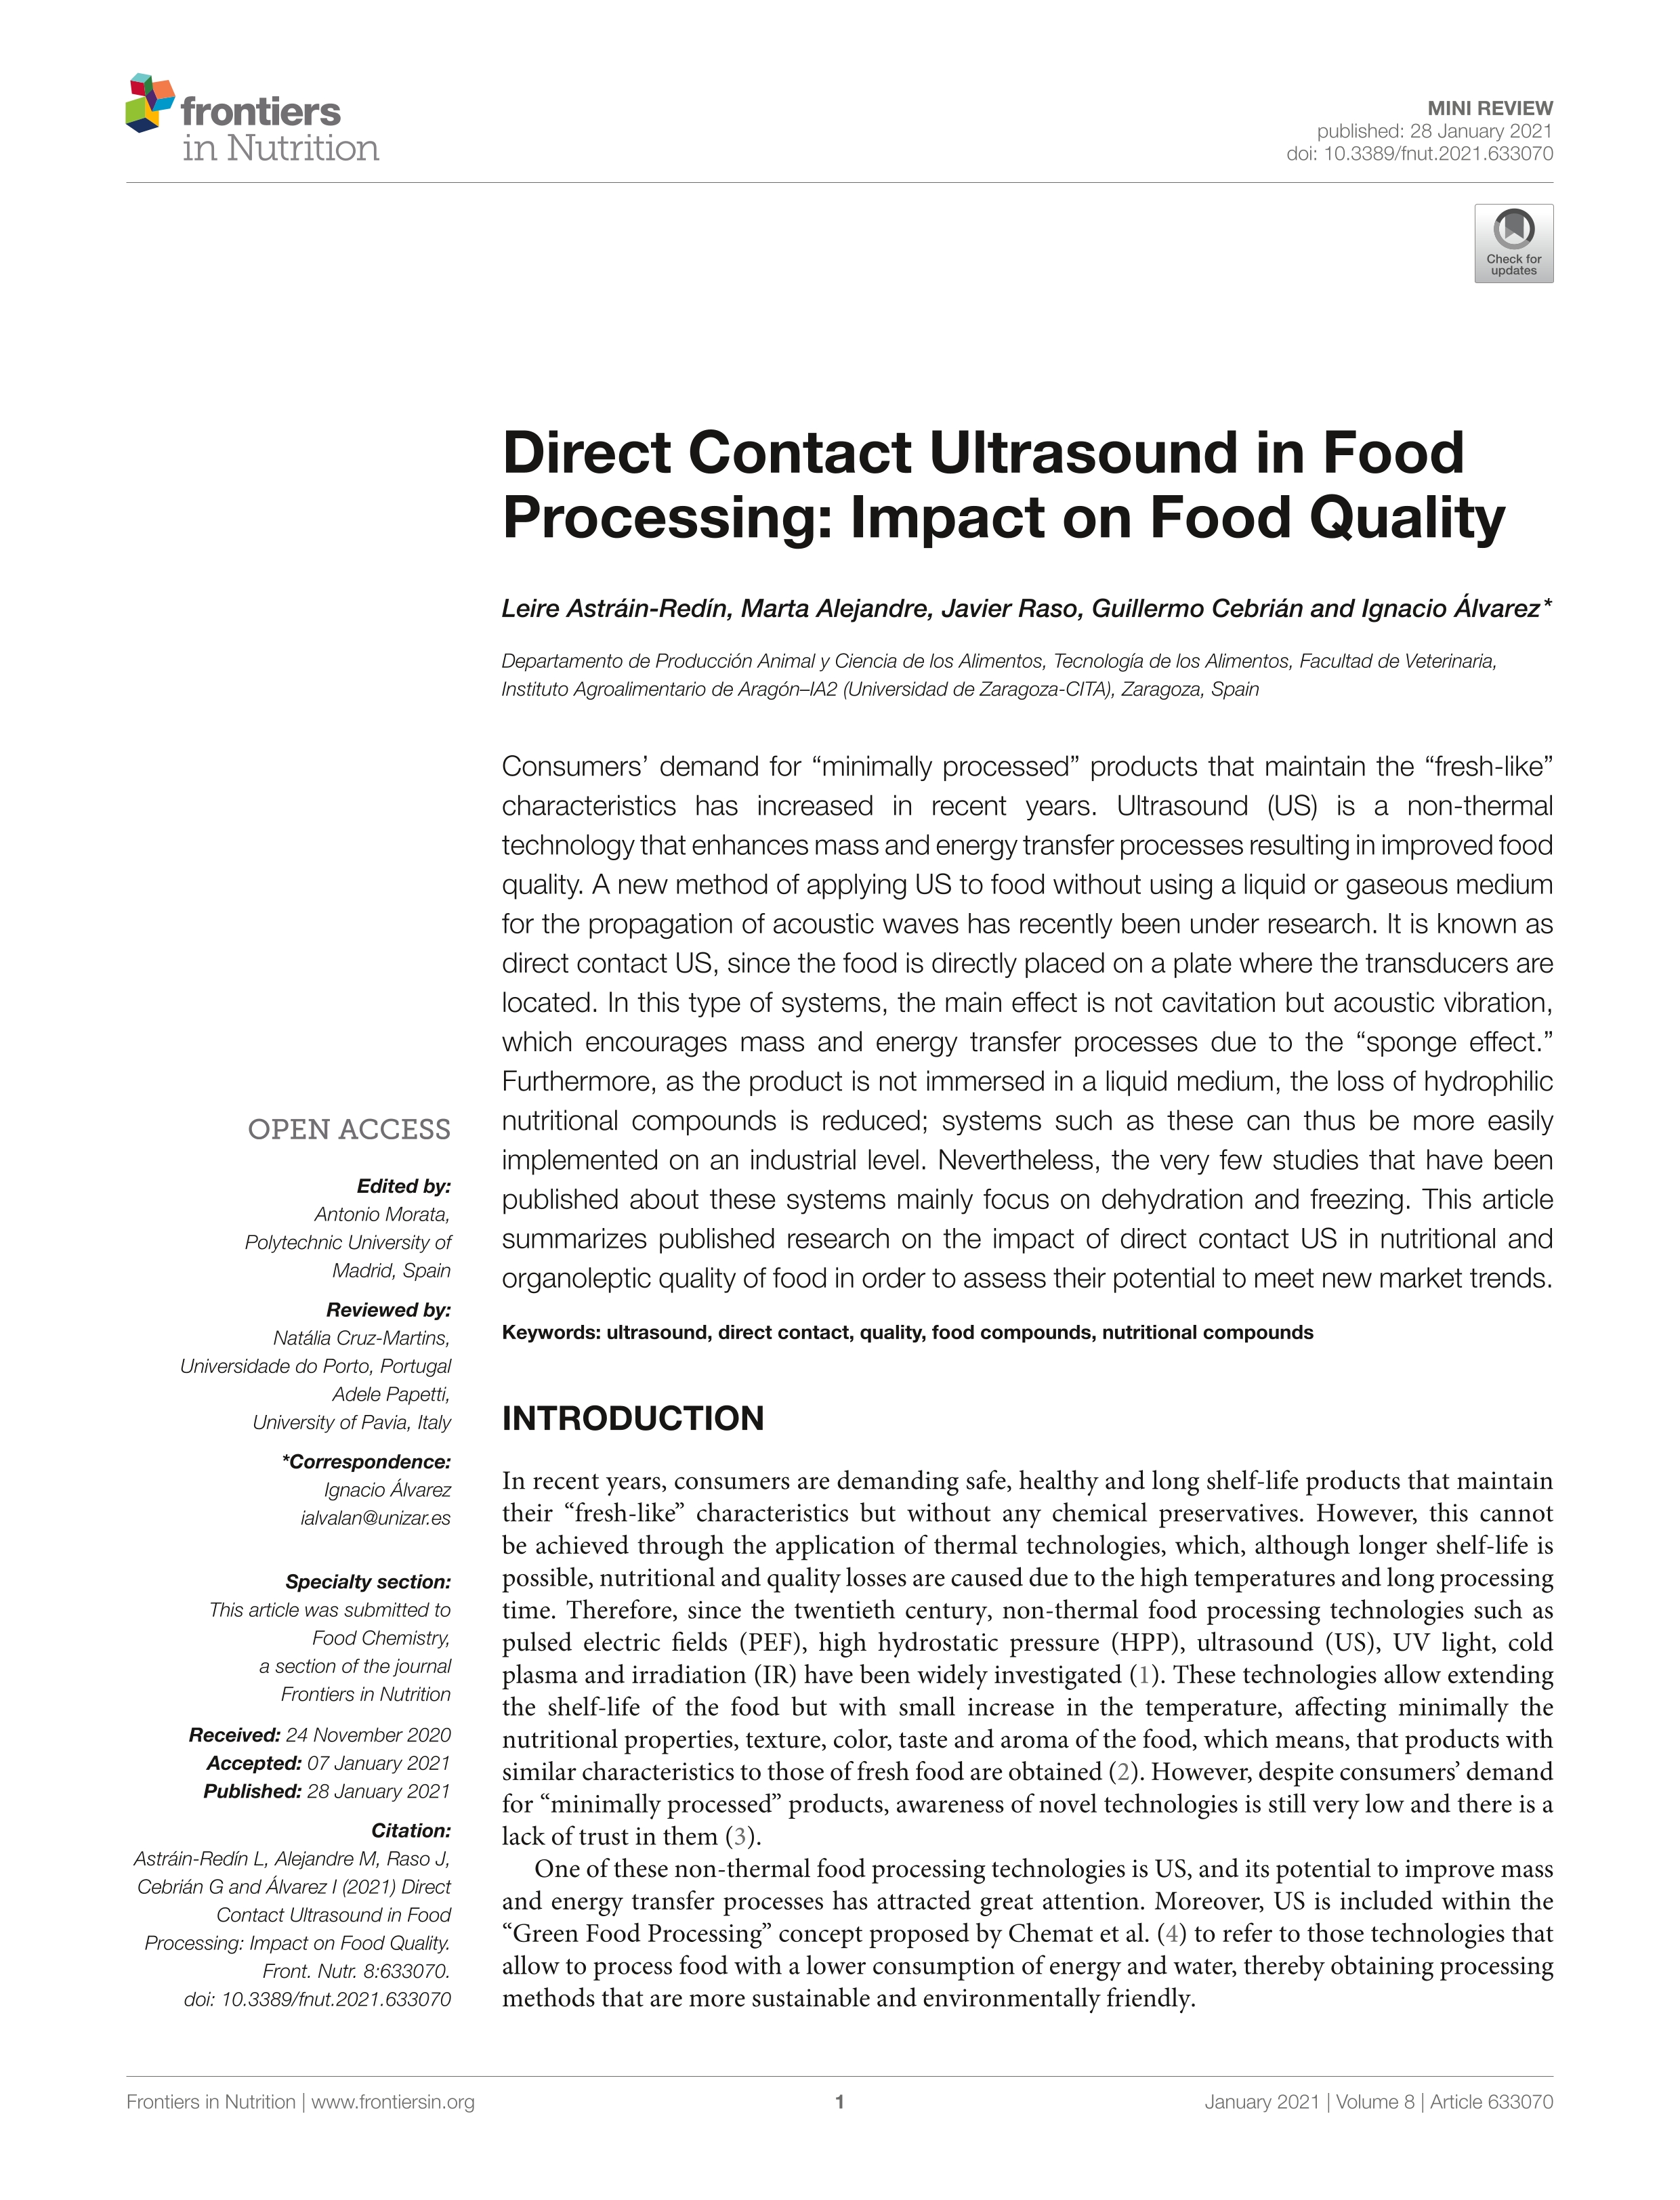 Direct Contact Ultrasound in Food Processing: Impact on Food Quality